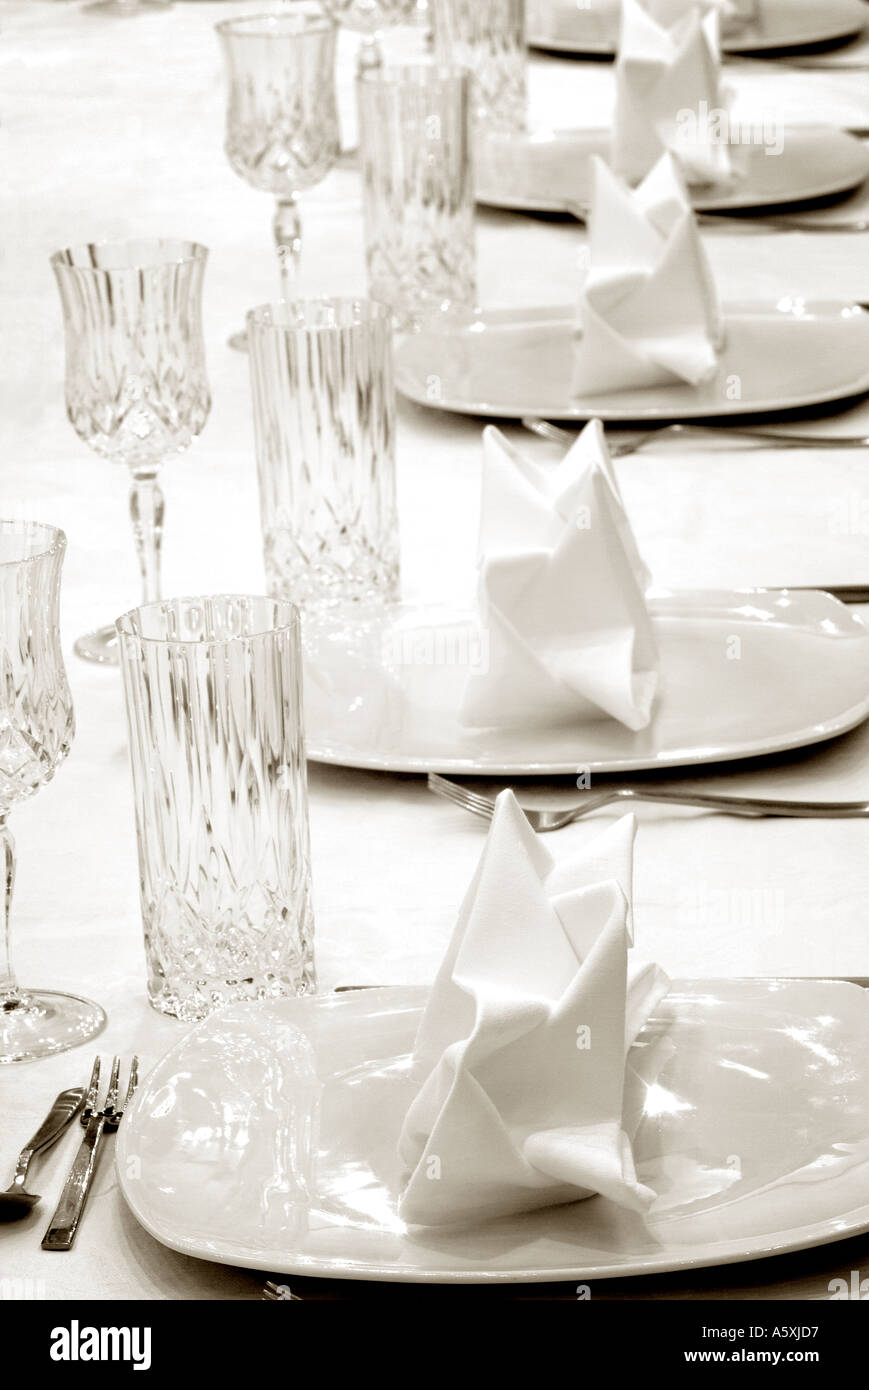 Place Settings on a Dinner Table Stock Photo